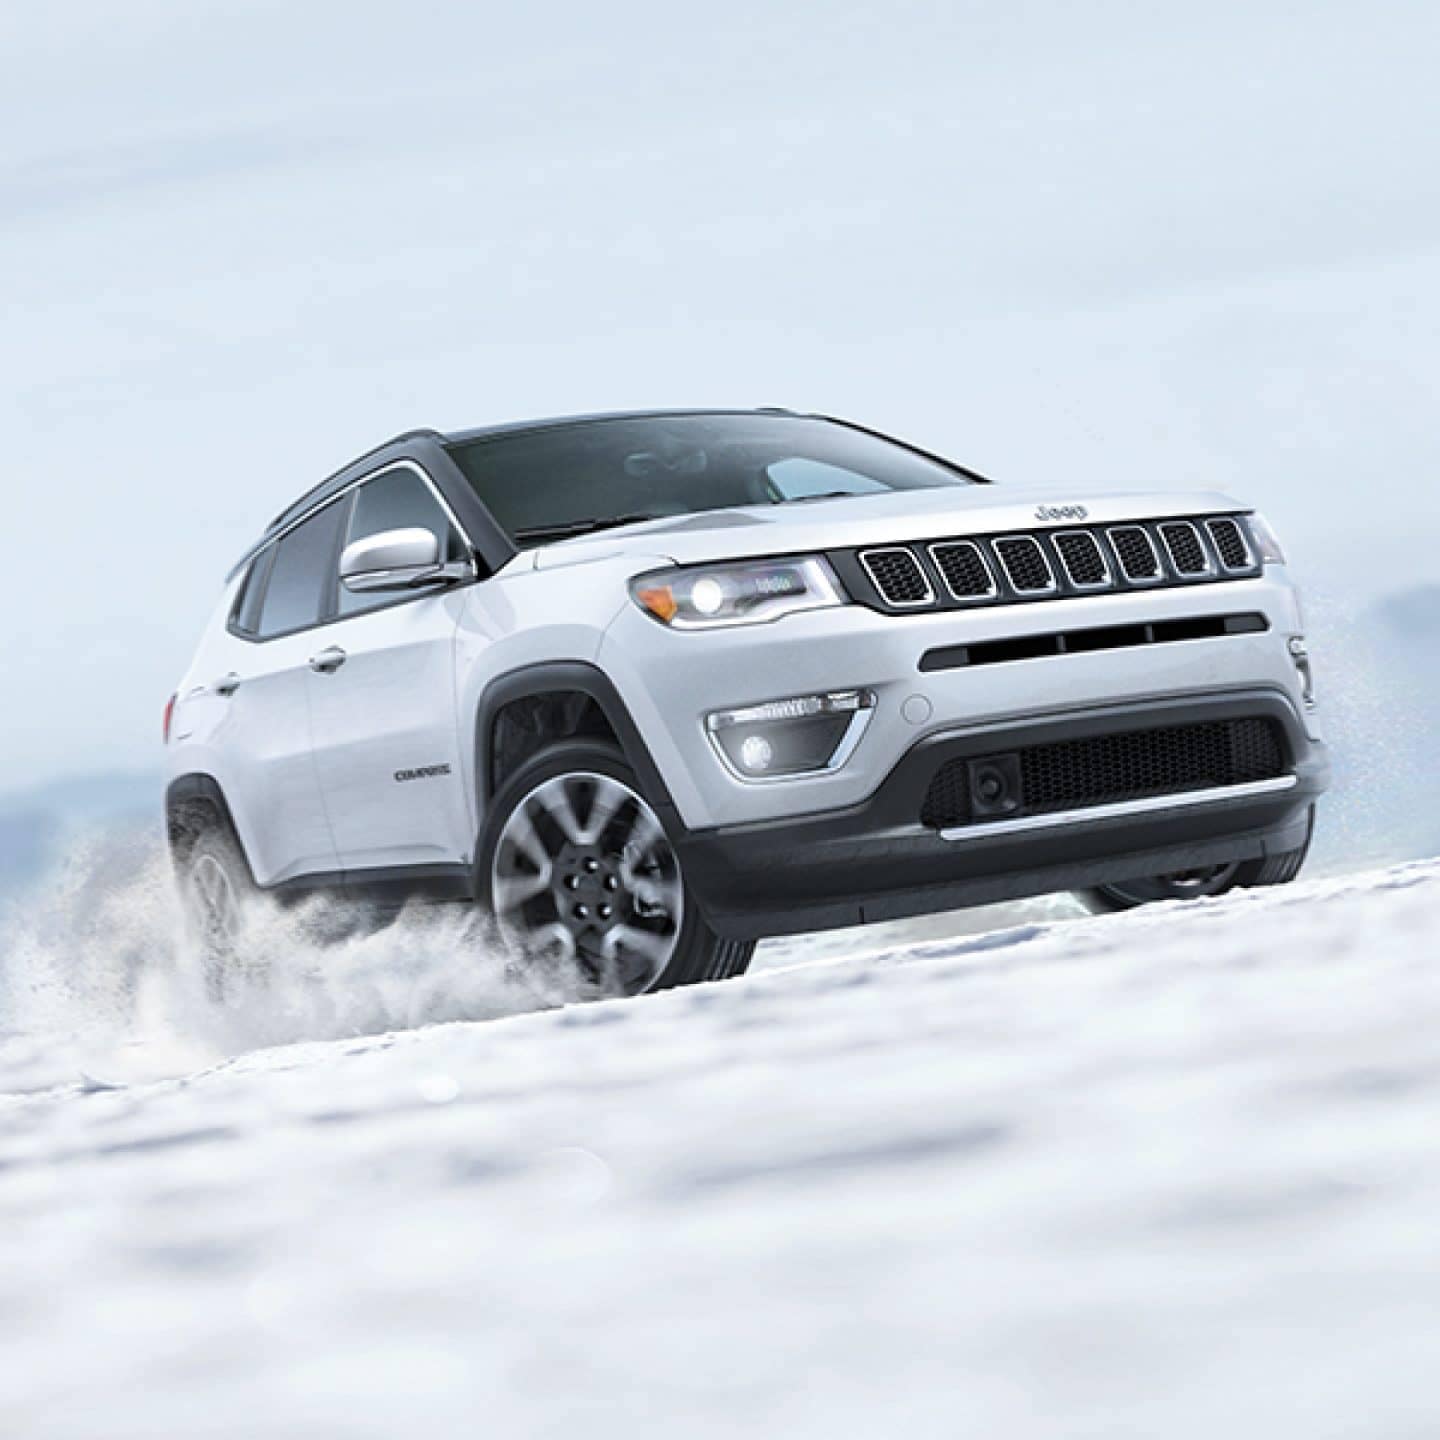 2018 Jeep Compass Model Review